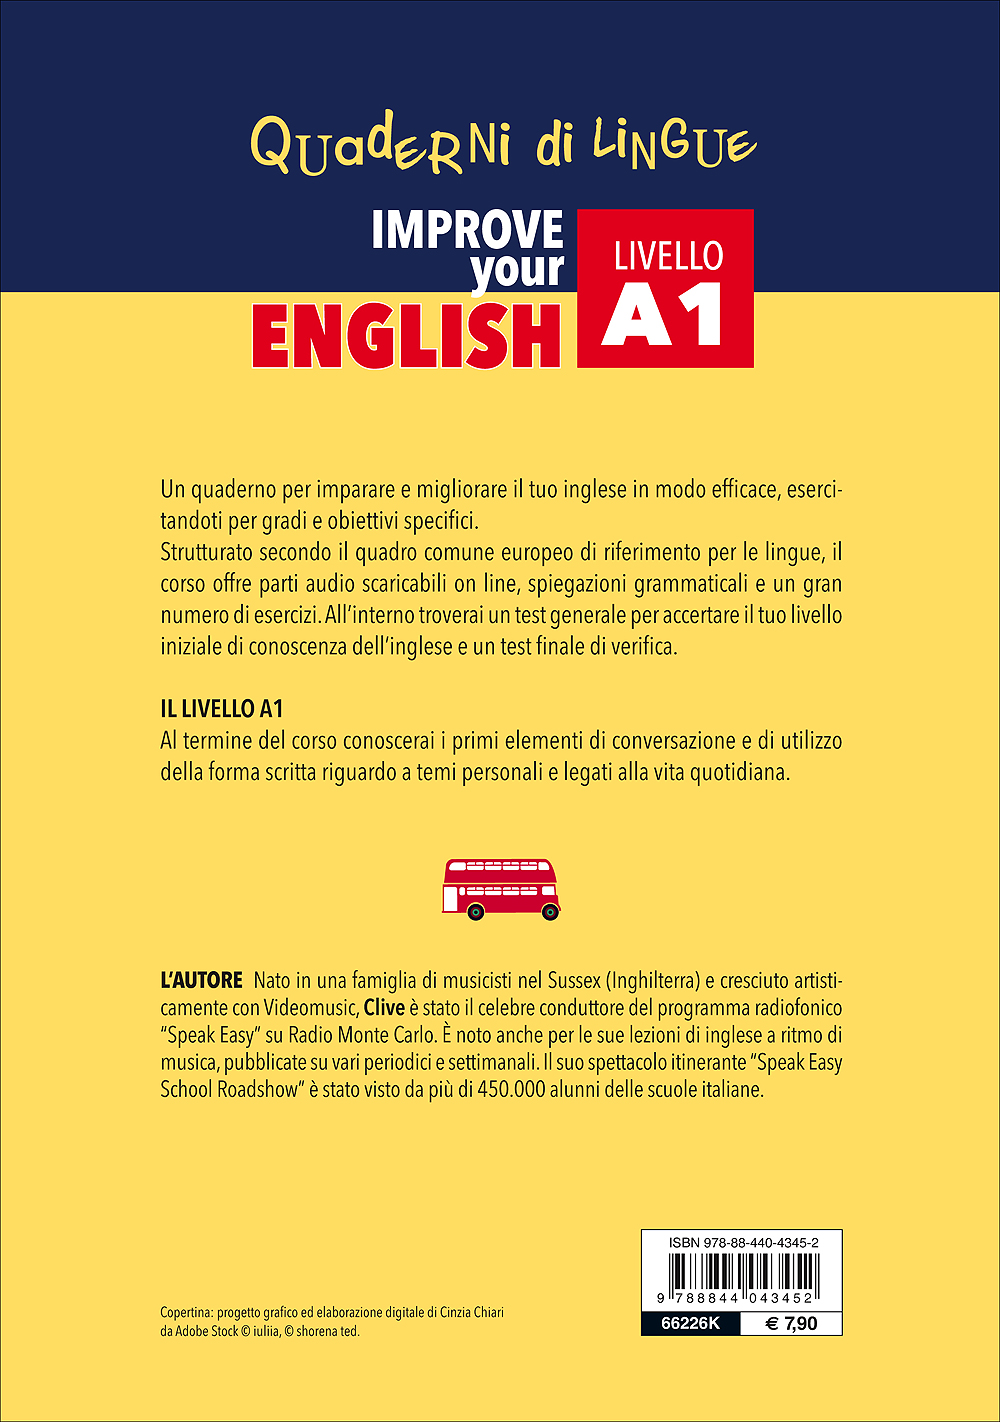 Improve your English A1